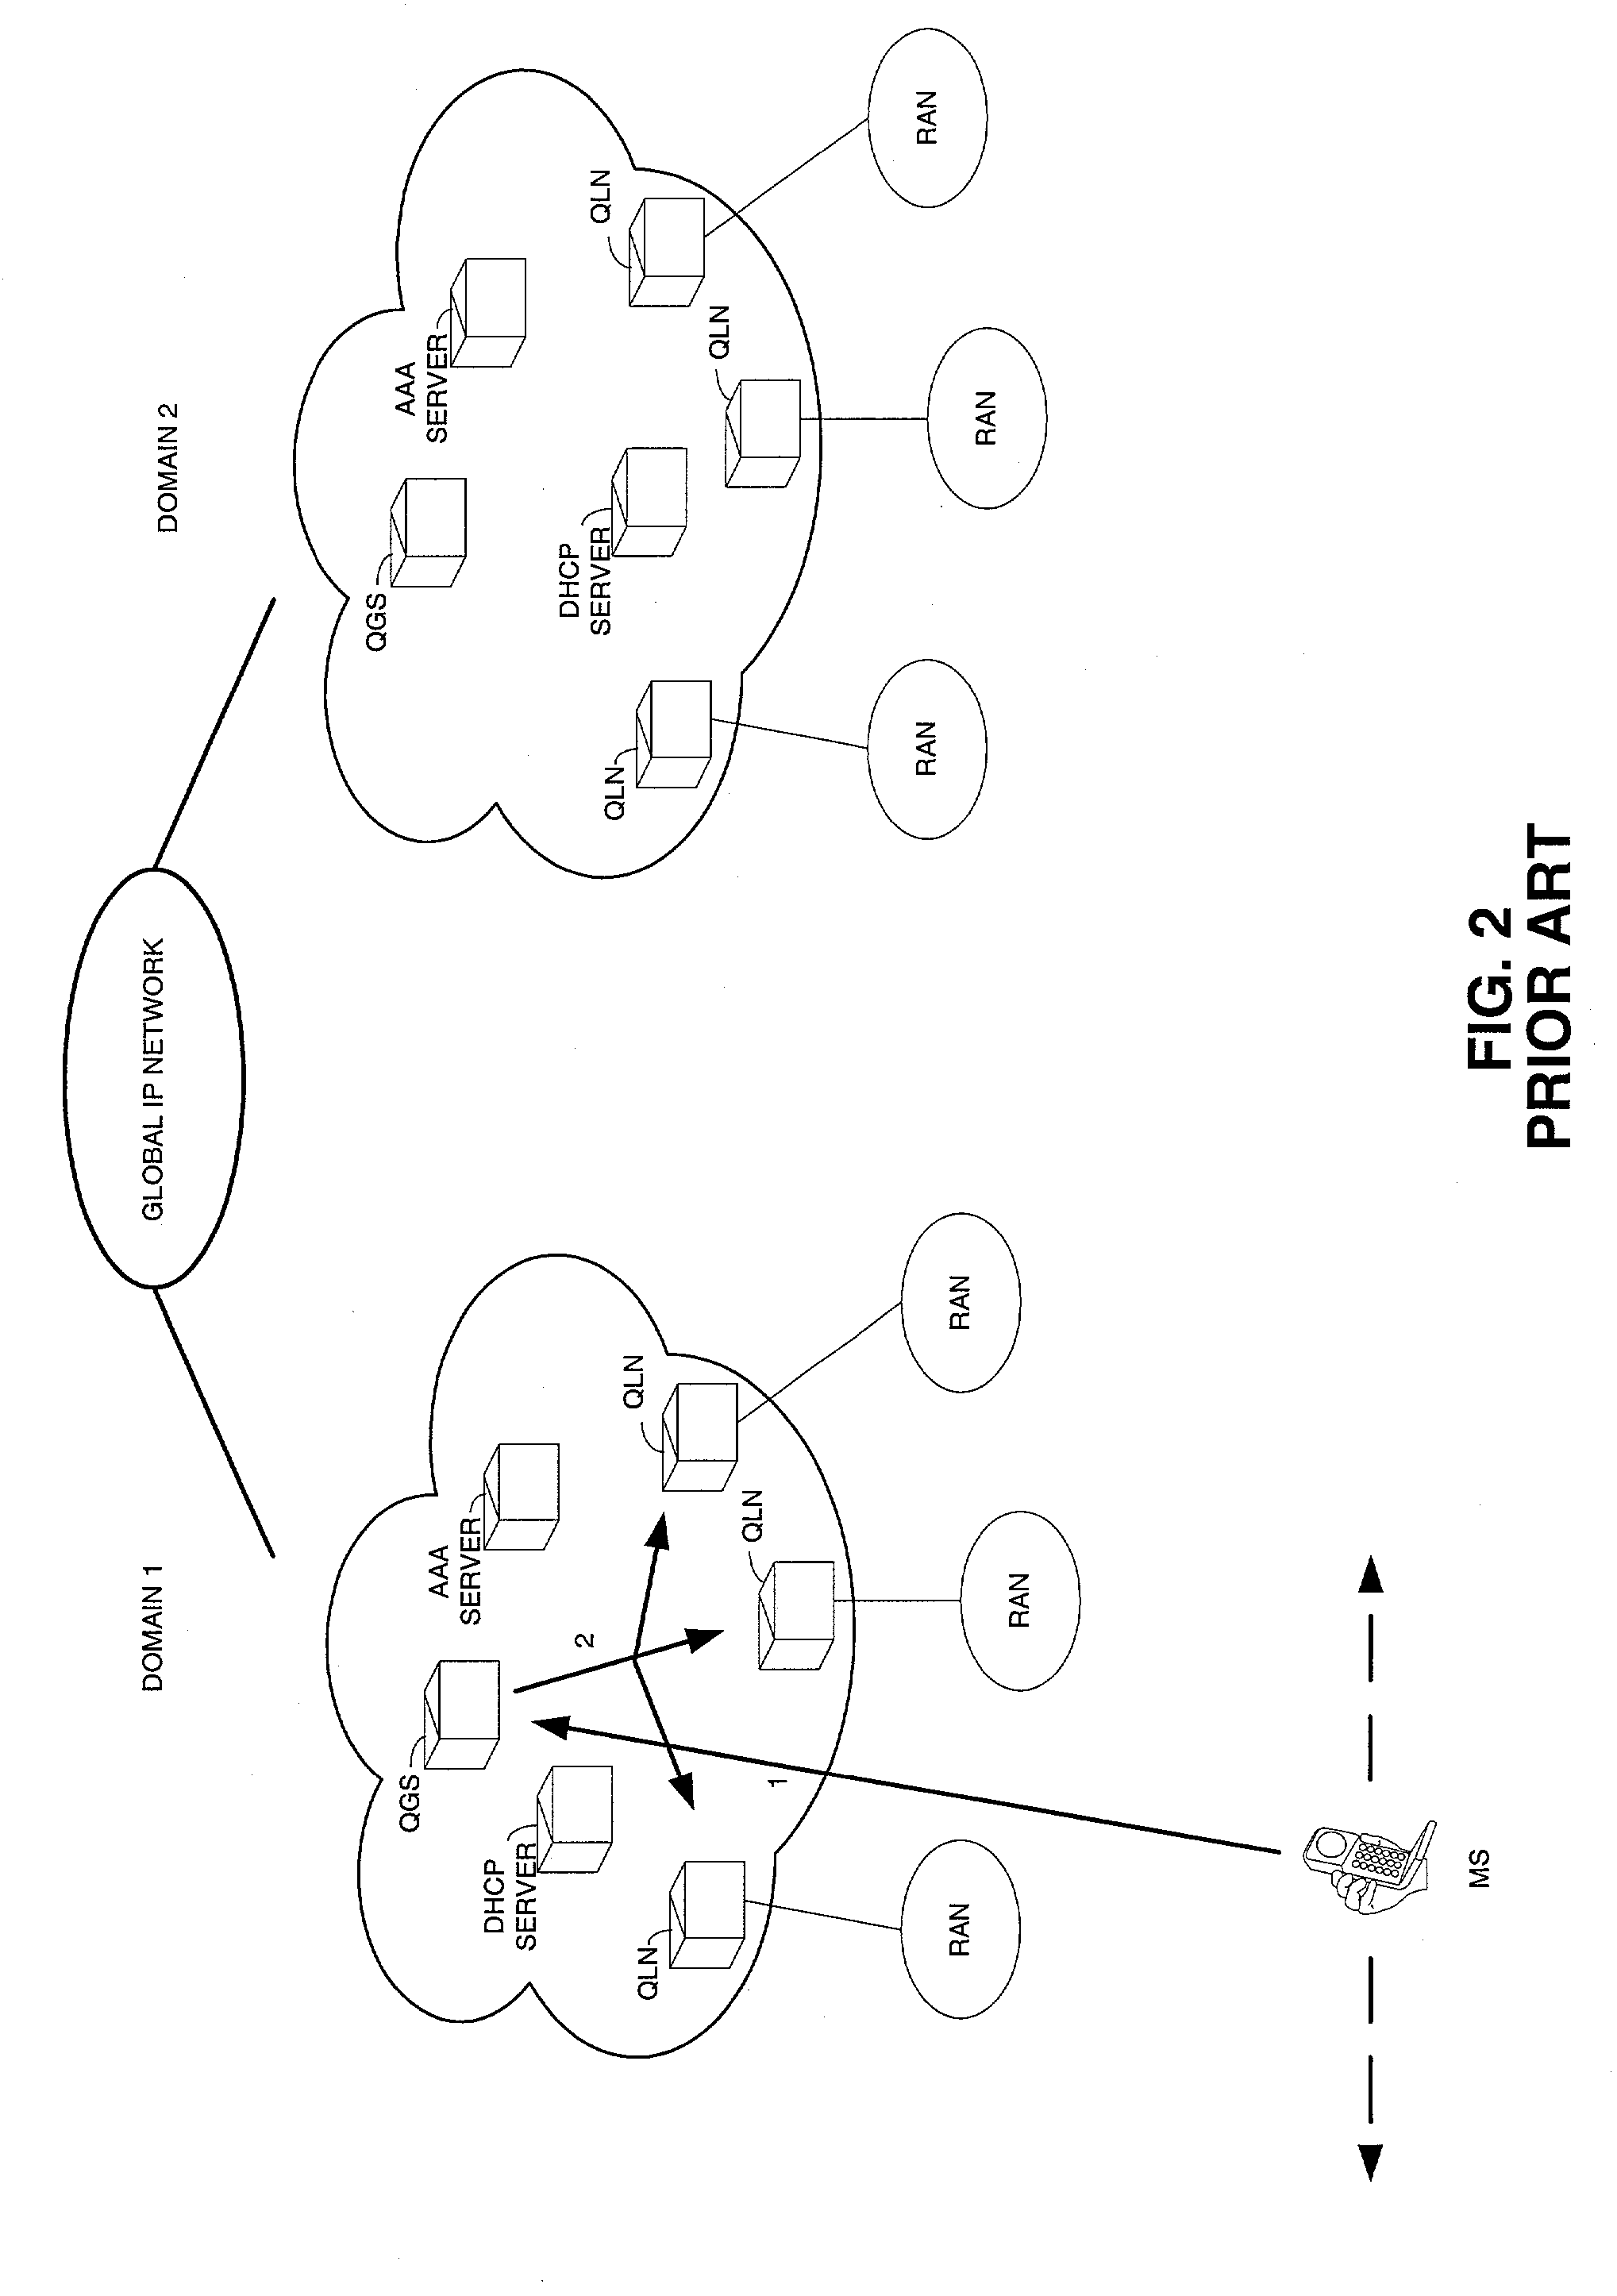 Method for distributing and conditioning traffic for mobile networks based on differentiated services